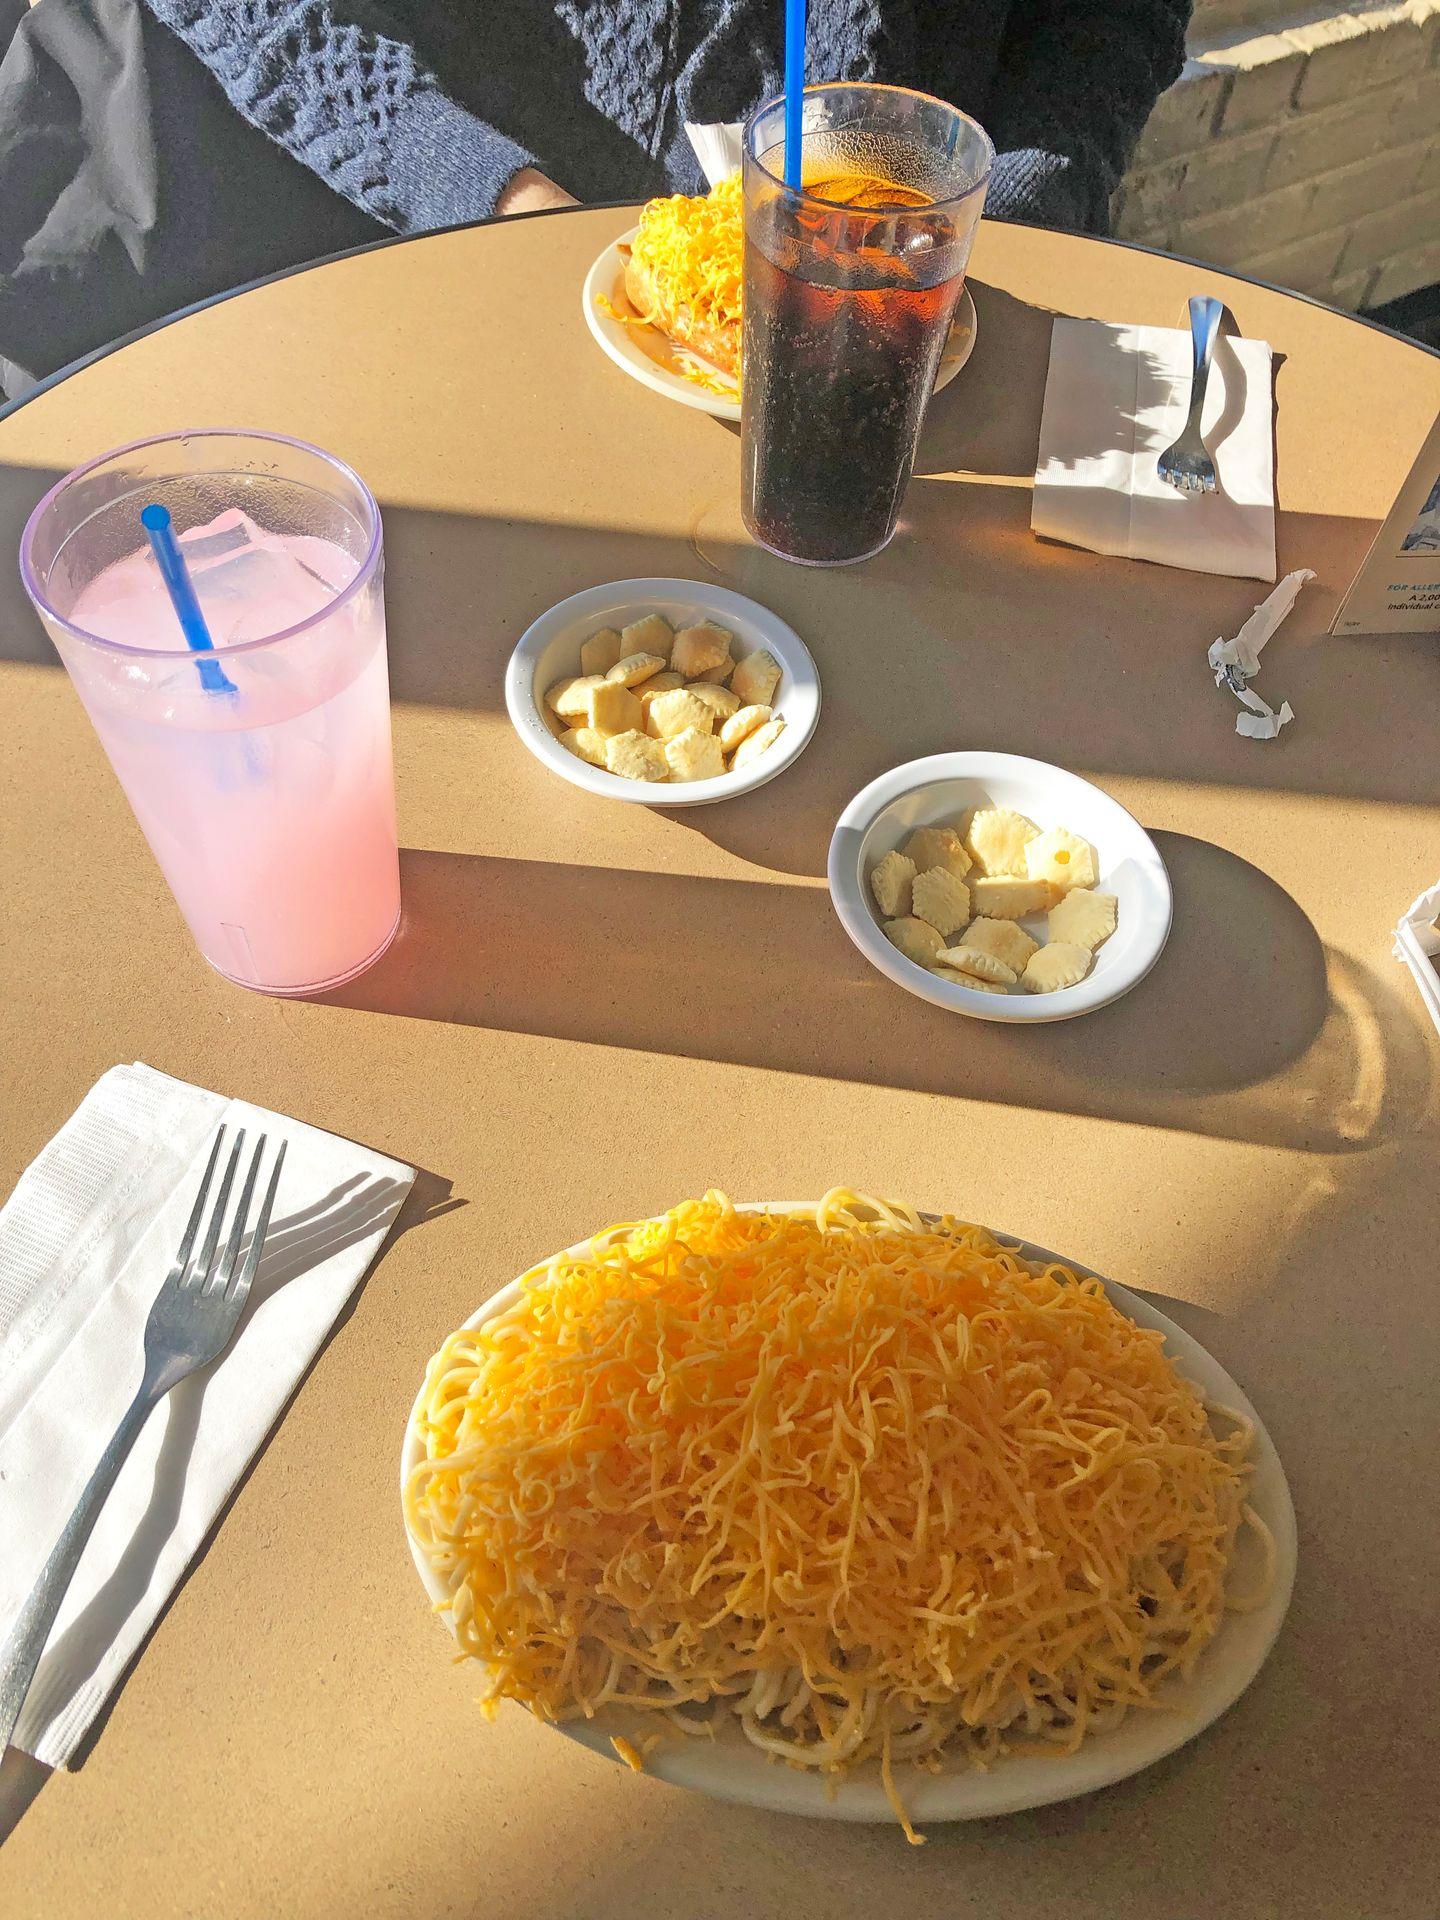 Looking down a plate of spaghetti and cheese with bowls of oyster crackers and a pink lemonade.